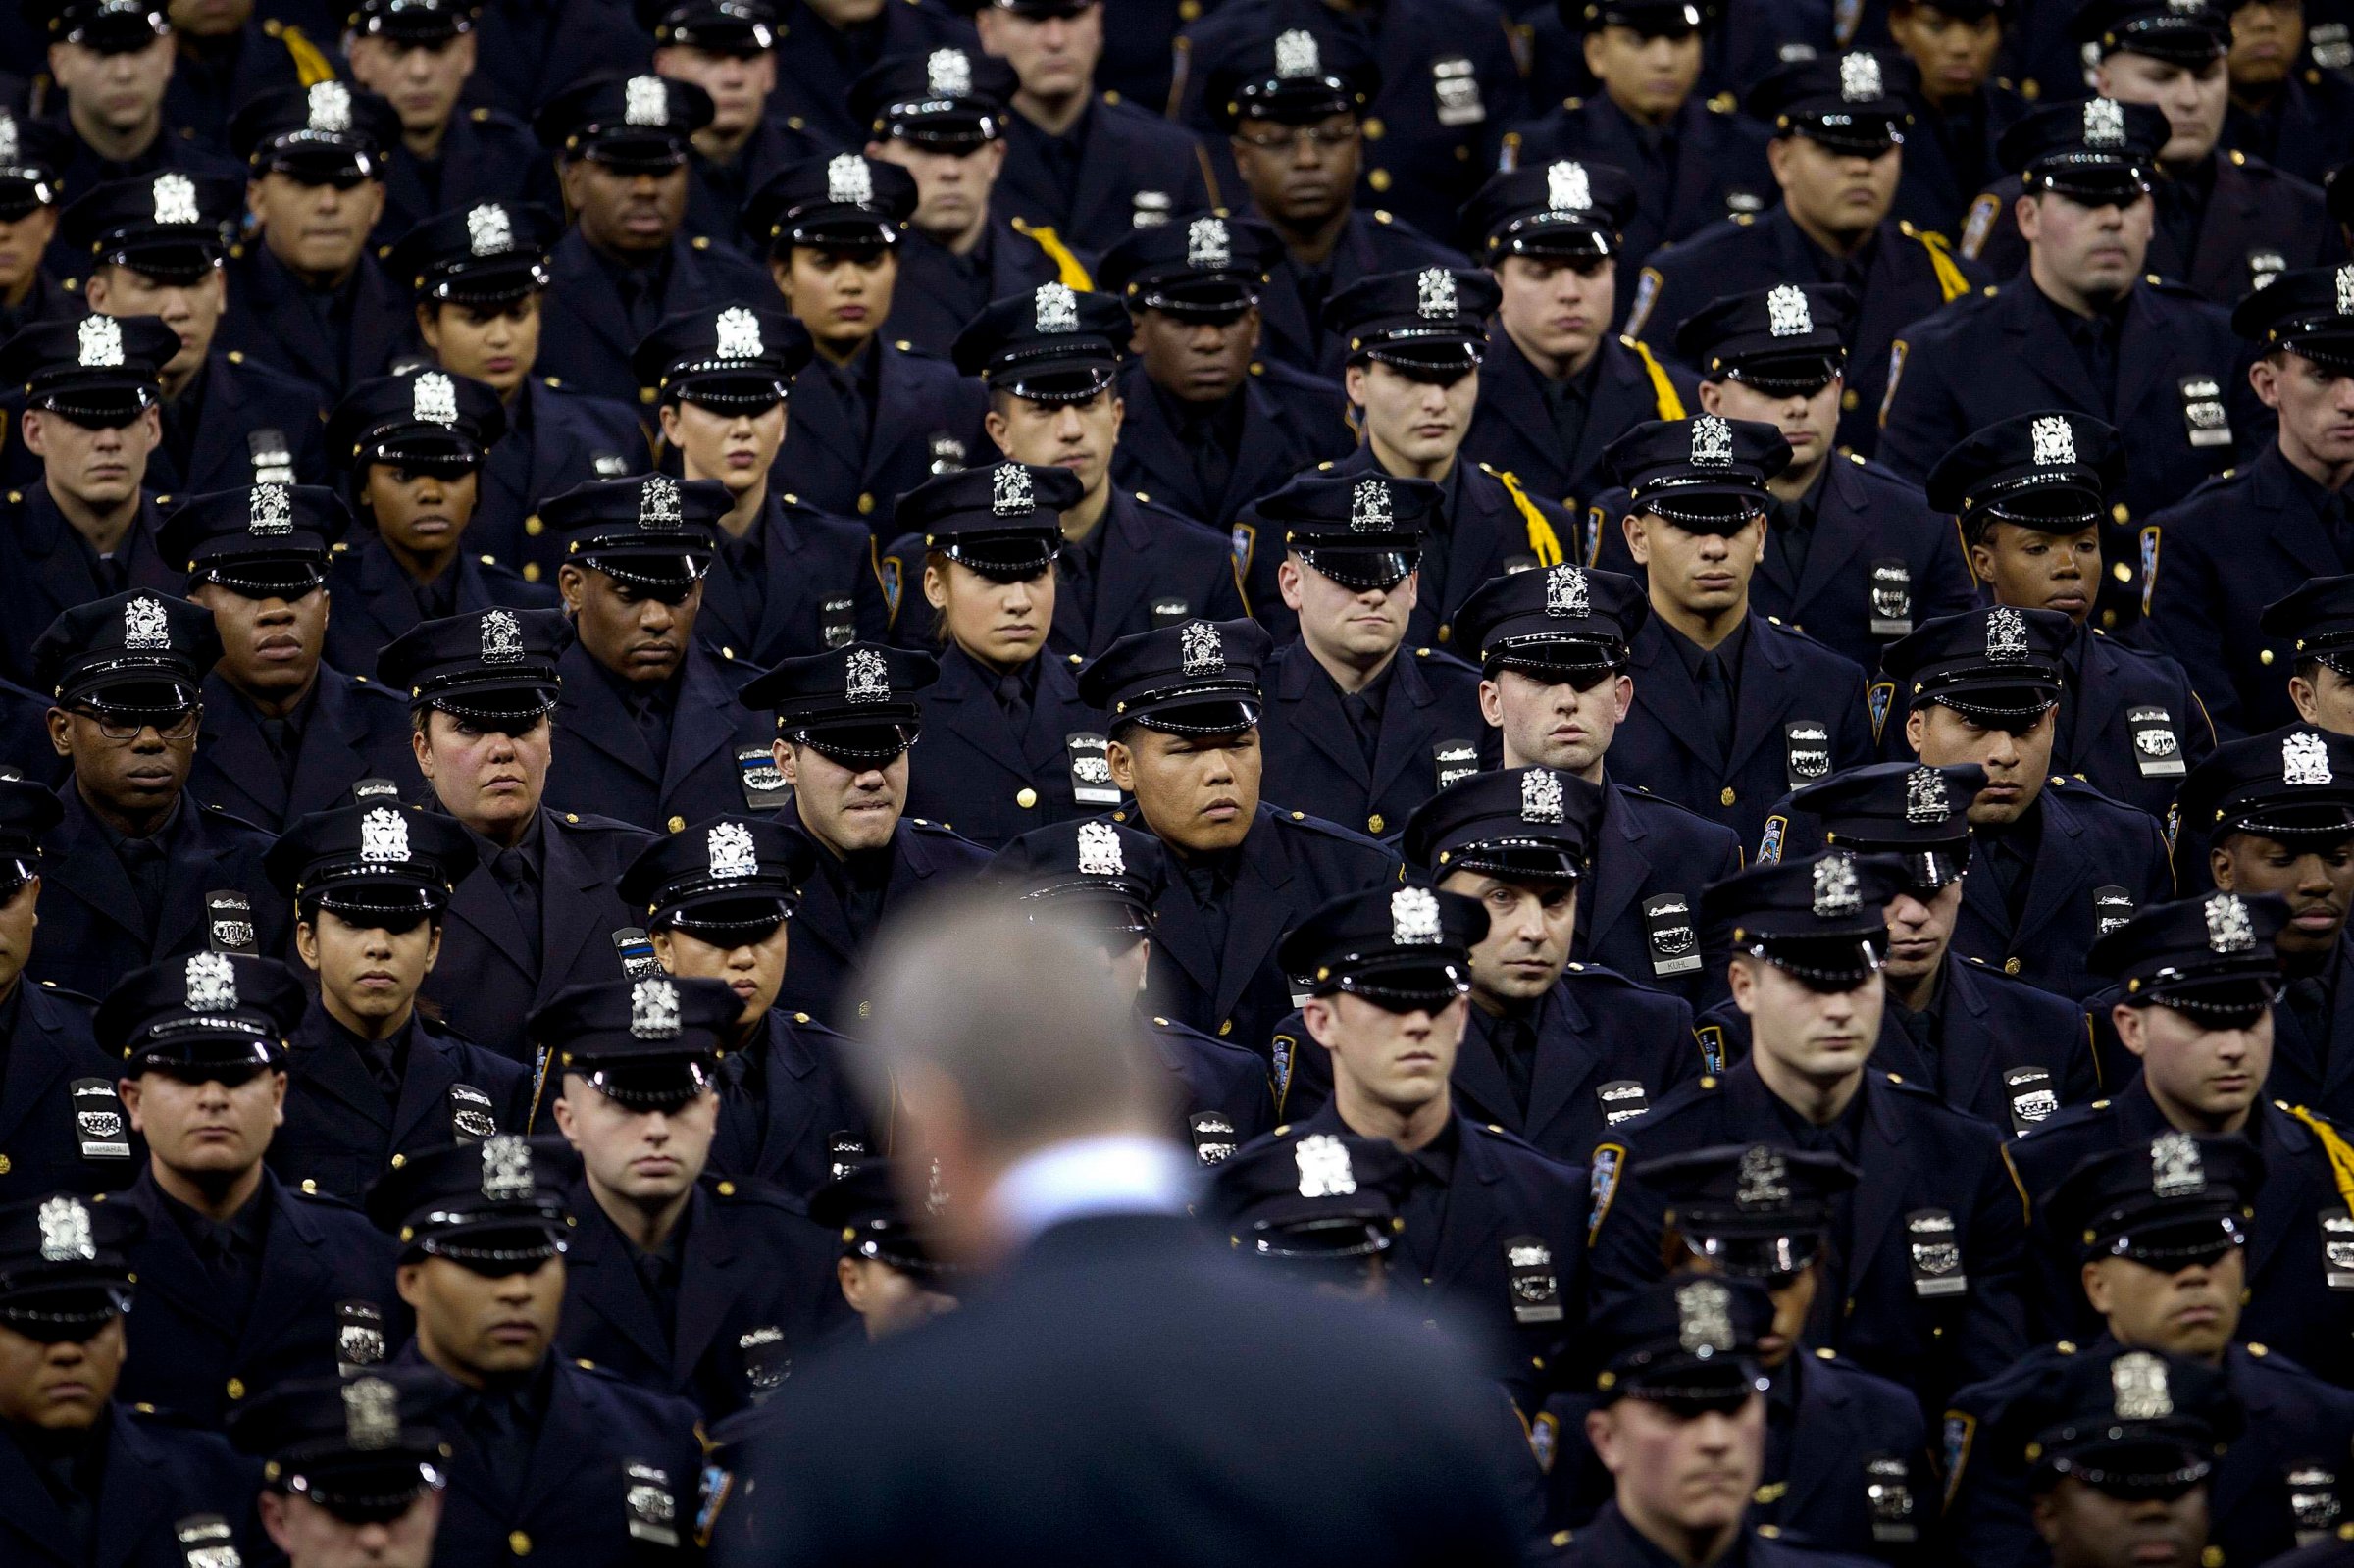 Blasio speaks from the podium to the New York City Police Academy Graduating class in New York